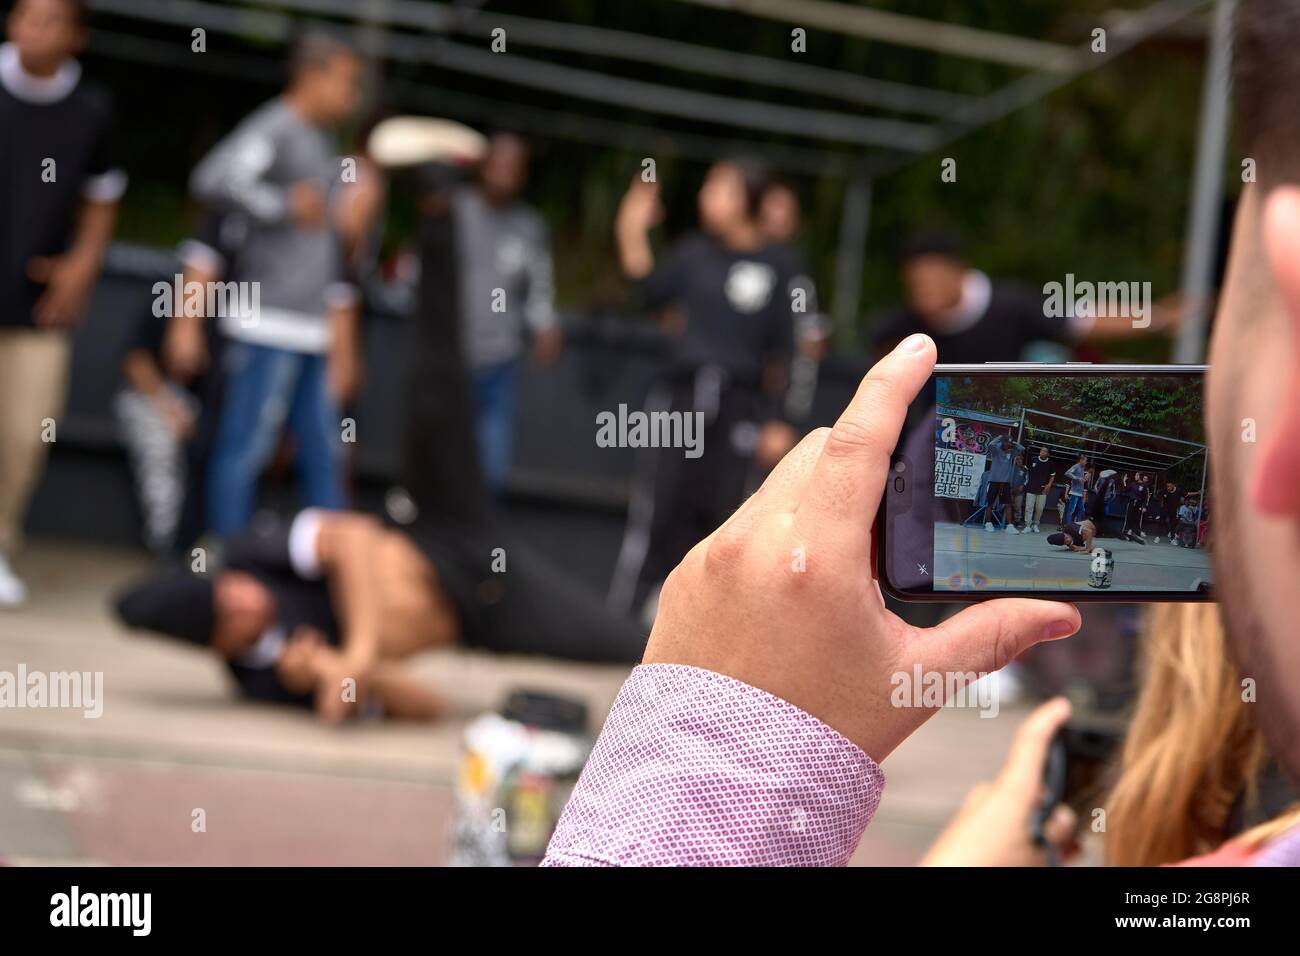 MEDELLI, COLOMBIA - Nov 30, 2019: A young man recording the street dance performance in Medellin, Colombia Stock Photo